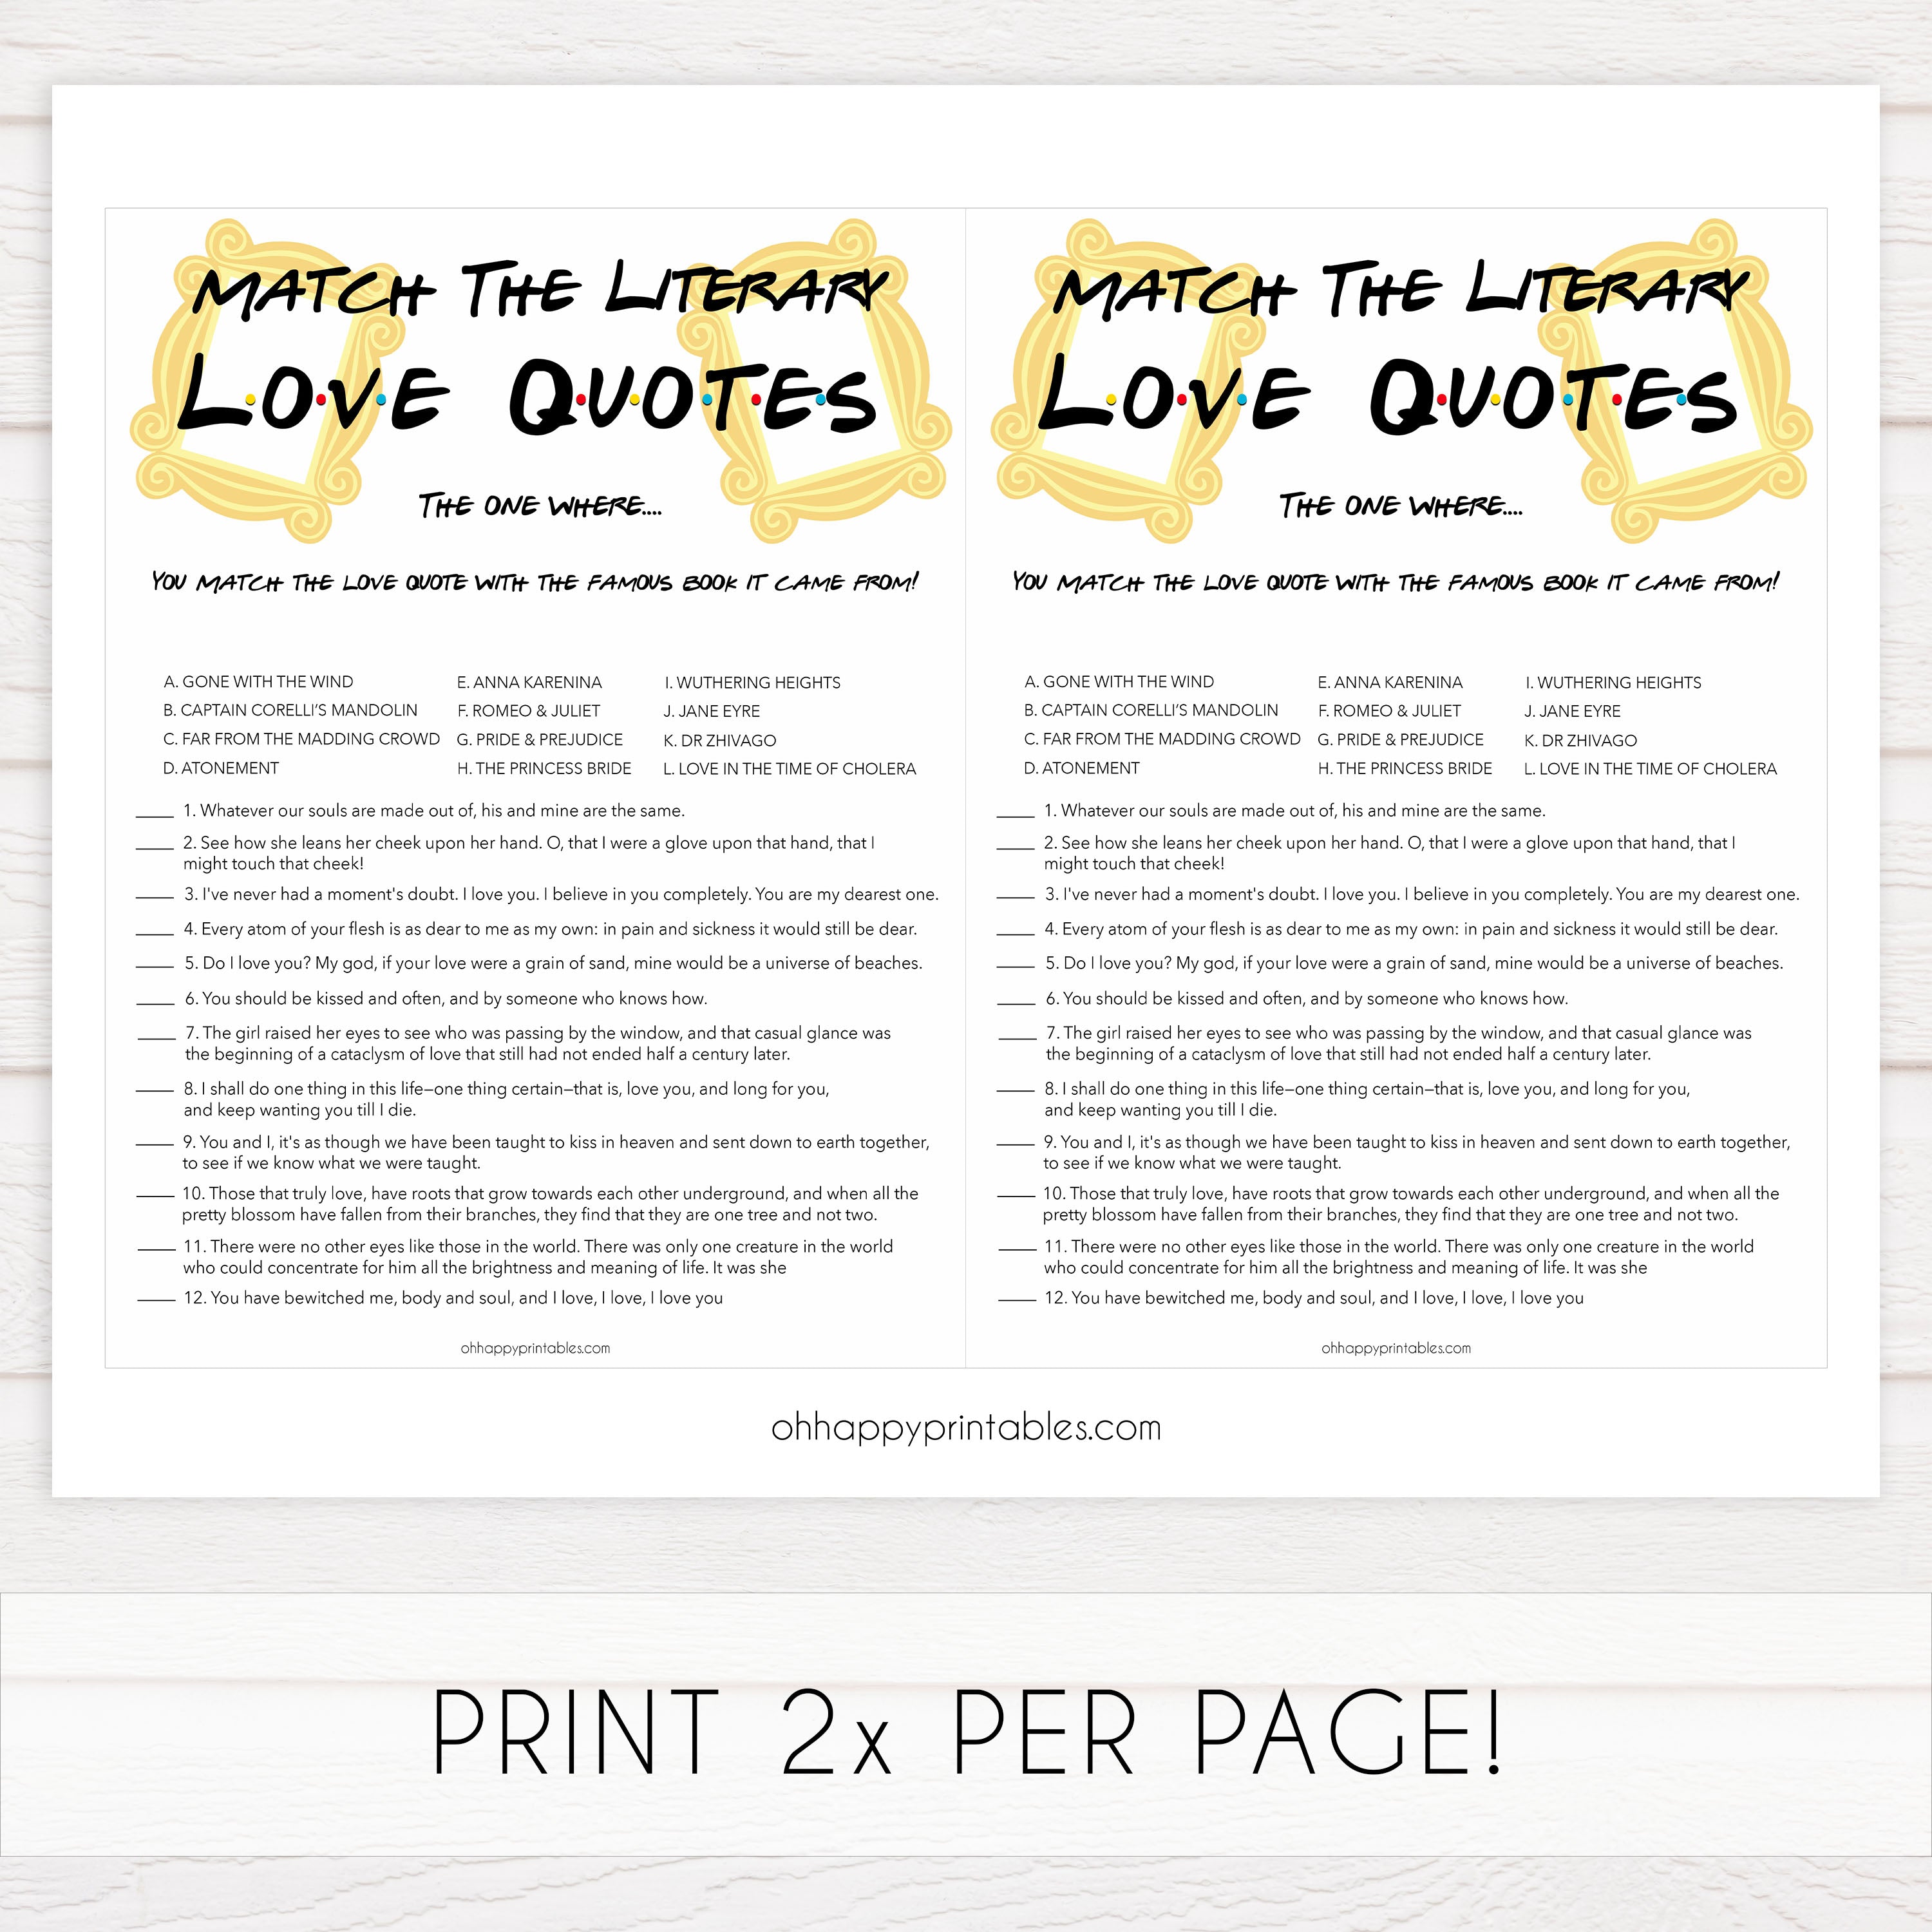 match the literary love quotes, Printable bridal shower games, friends bridal shower, friends bridal shower games, fun bridal shower games, bridal shower game ideas, friends bridal shower